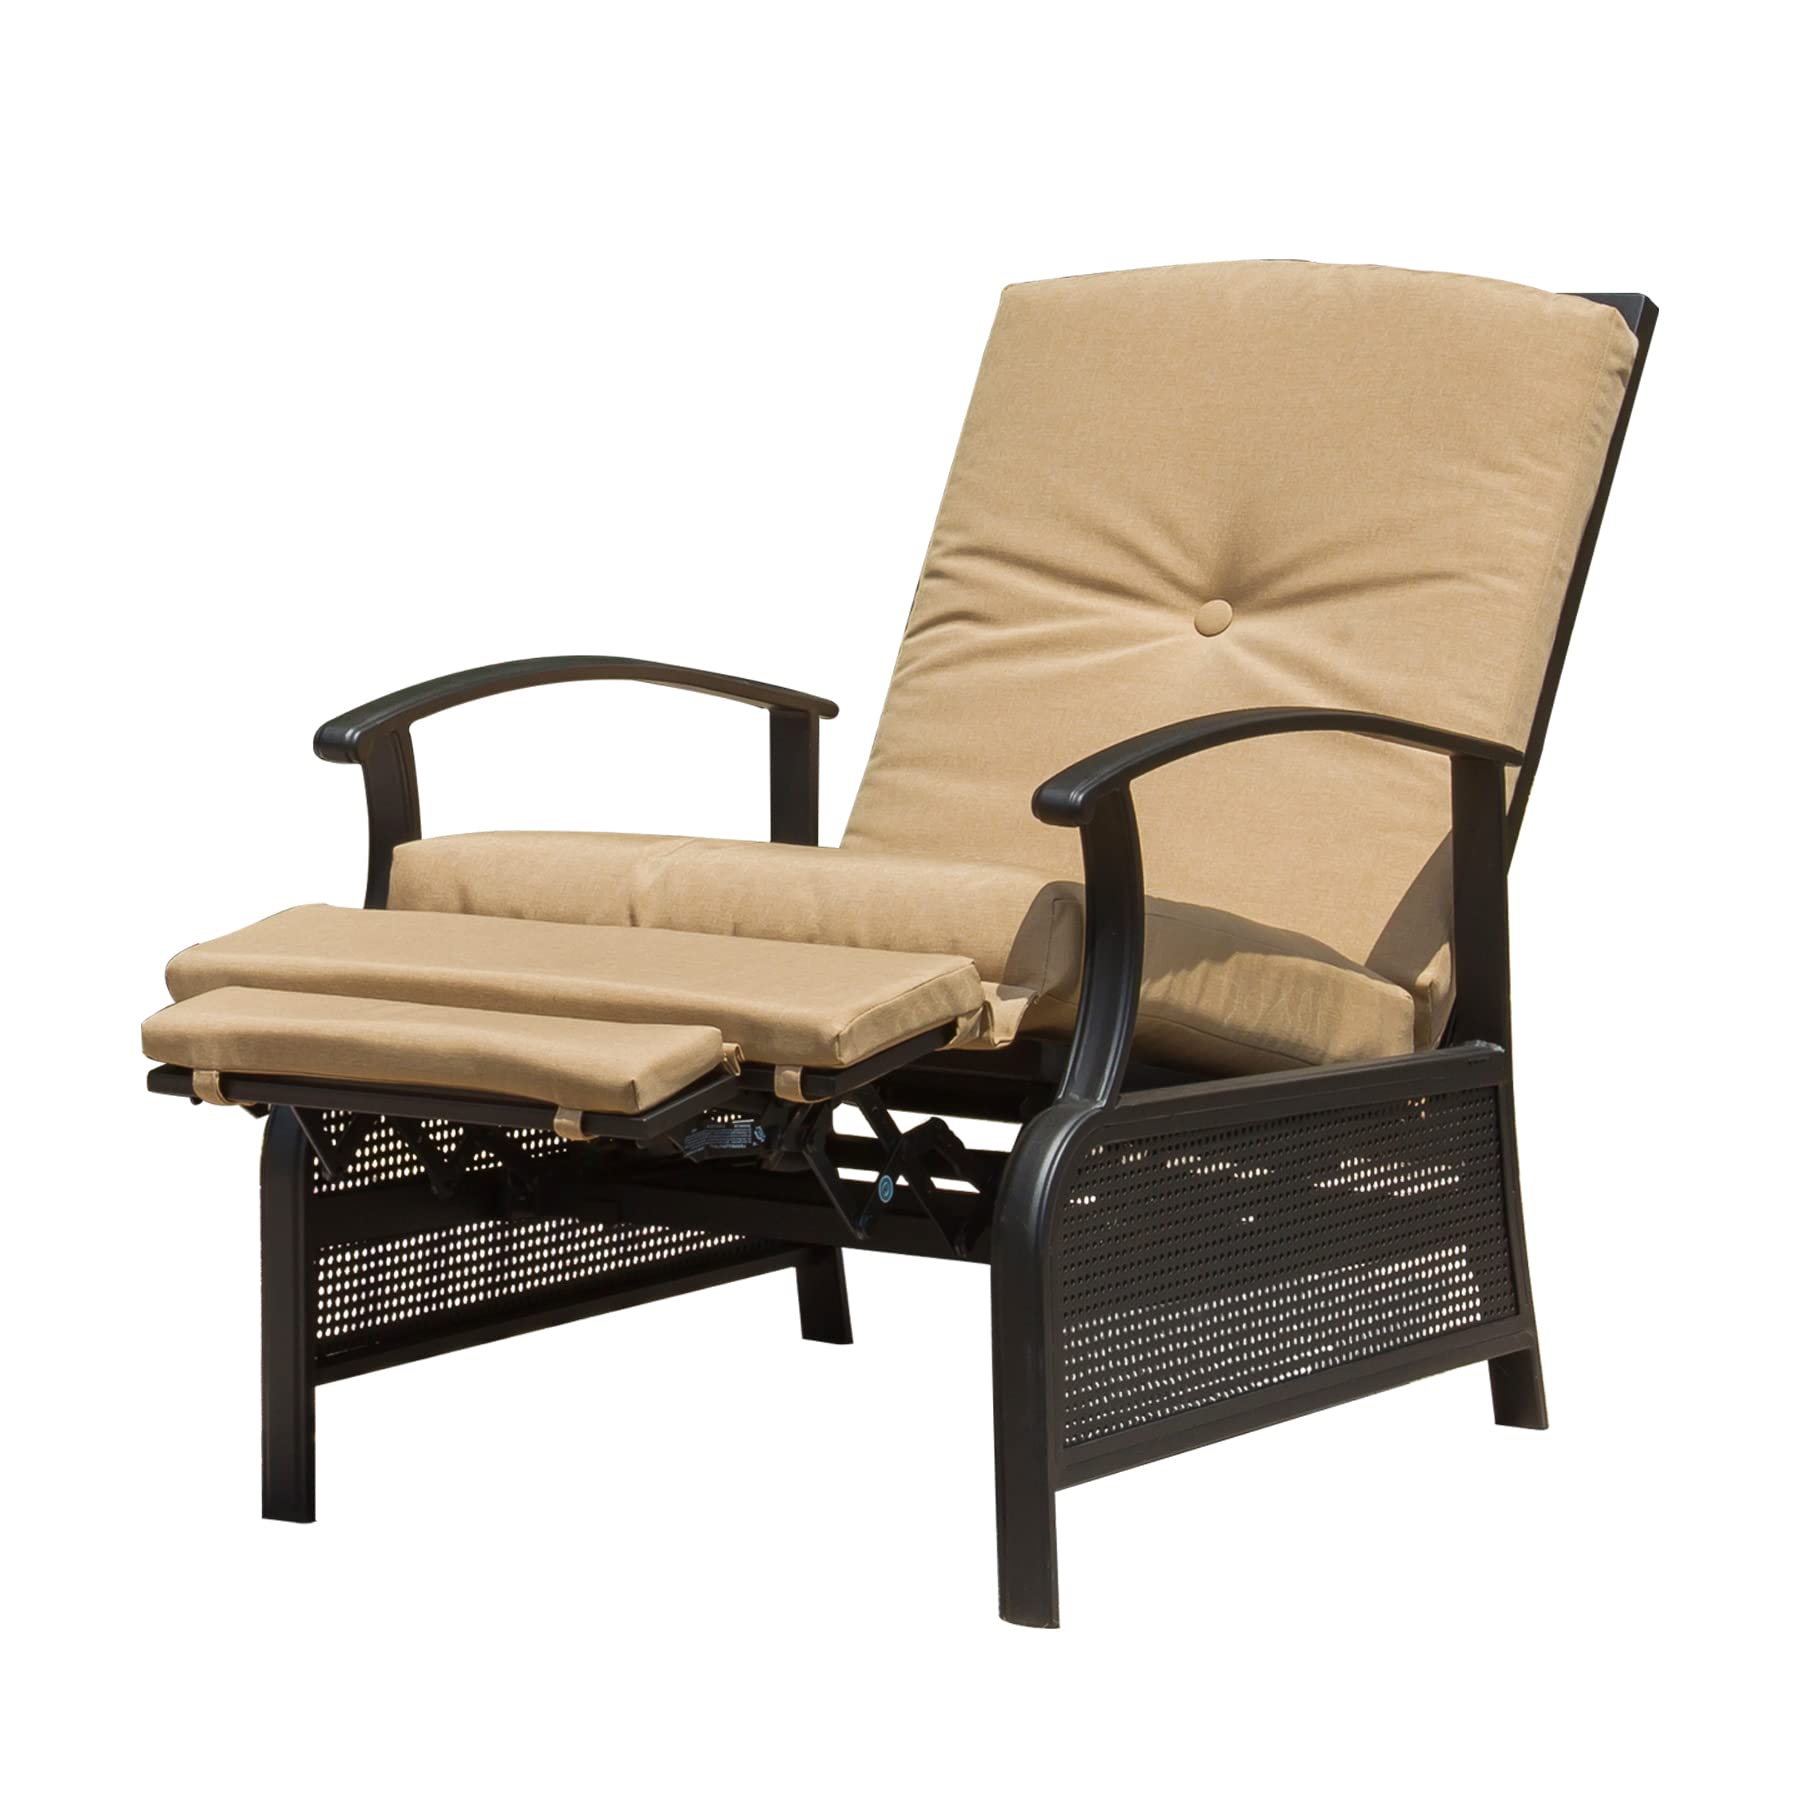 Domi Outdoor Living Adjustable Patio Recliner Chair, Metal Reclining Lounge Chair, Remova Recliner, Comfortable Seating - image 1 of 8